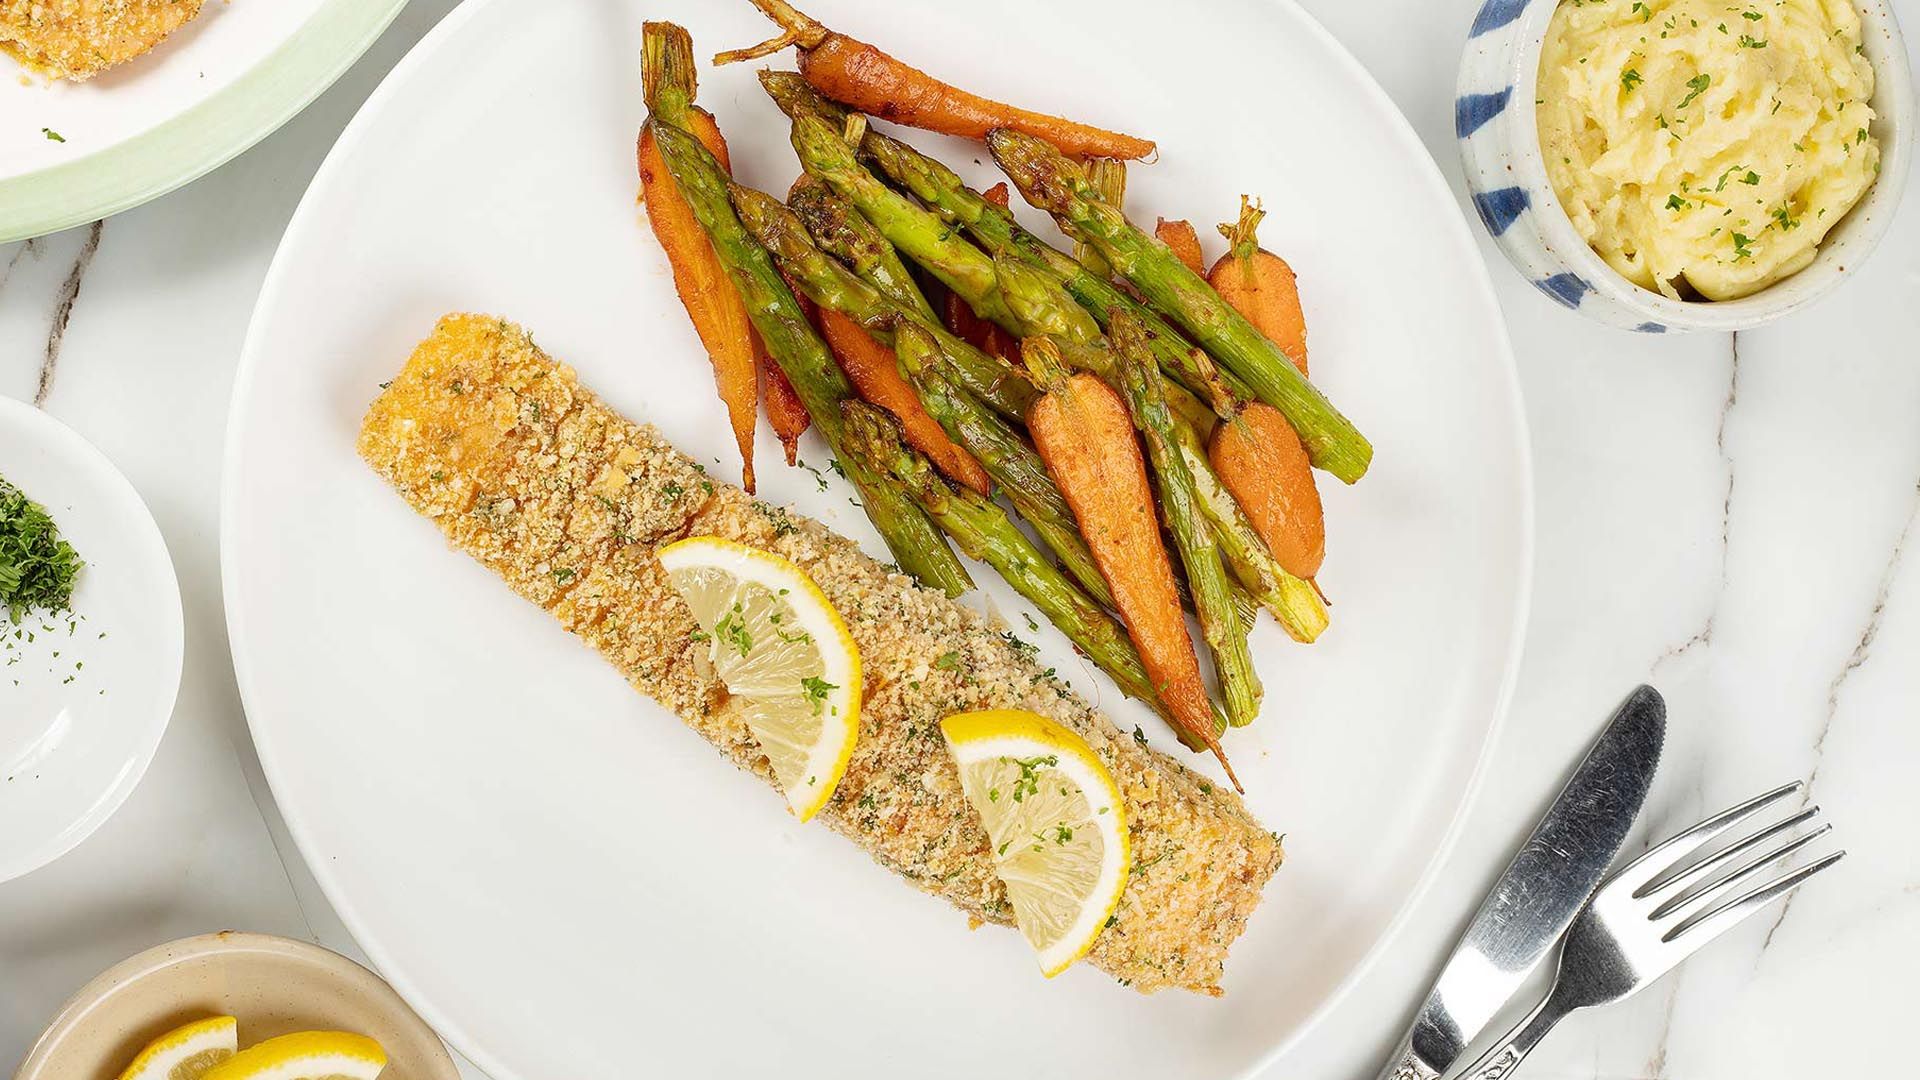 Parmesan Crusted Salmon Recipe With Asparagus step 6